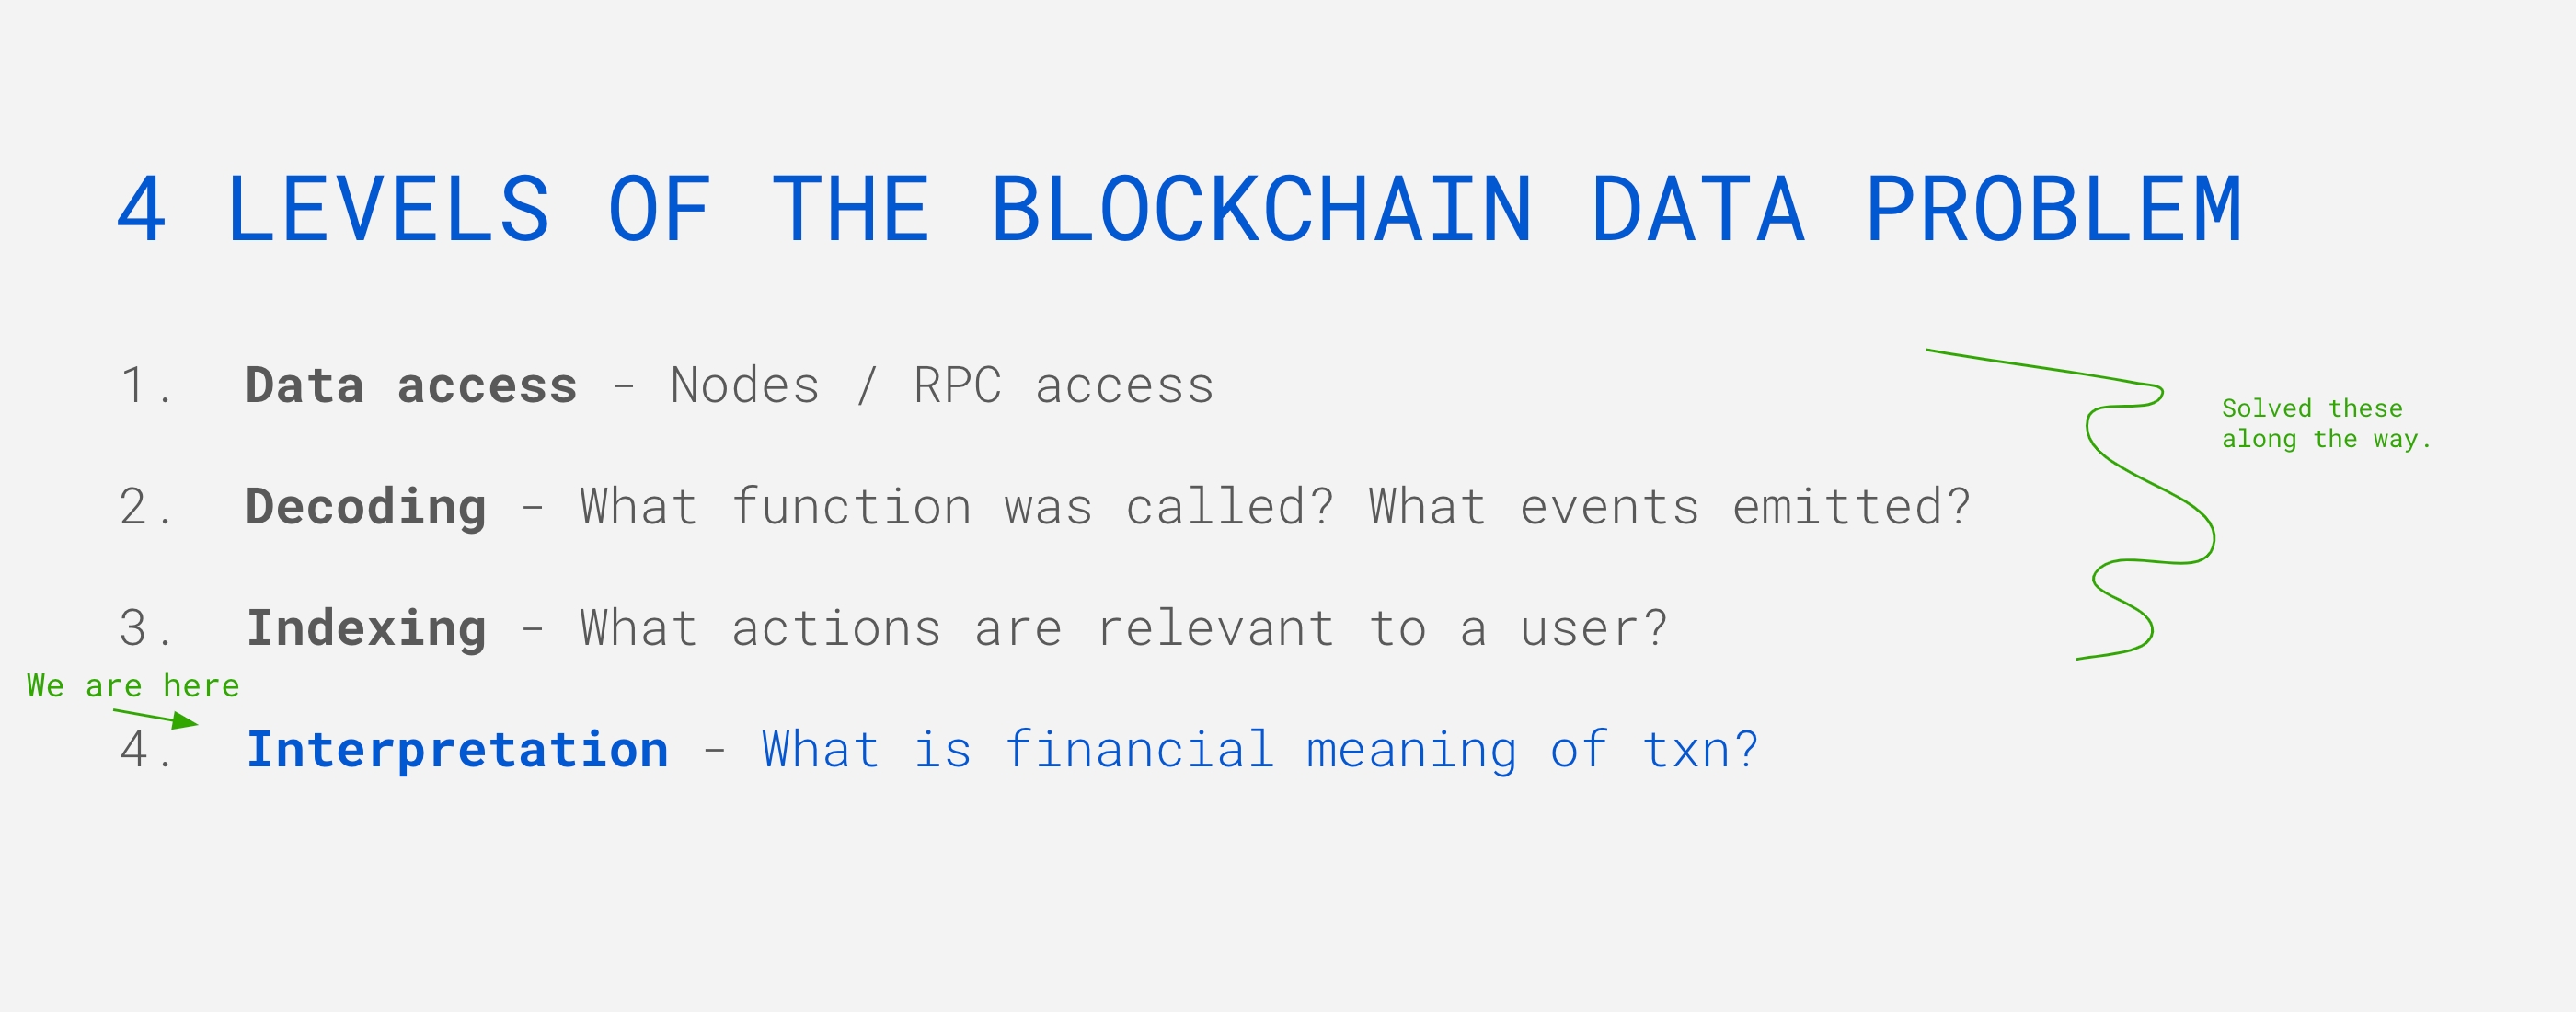 Levels of the Blockchain Data Problem: Data Access, Decoding, Indexing, Interpretation (we are here!)